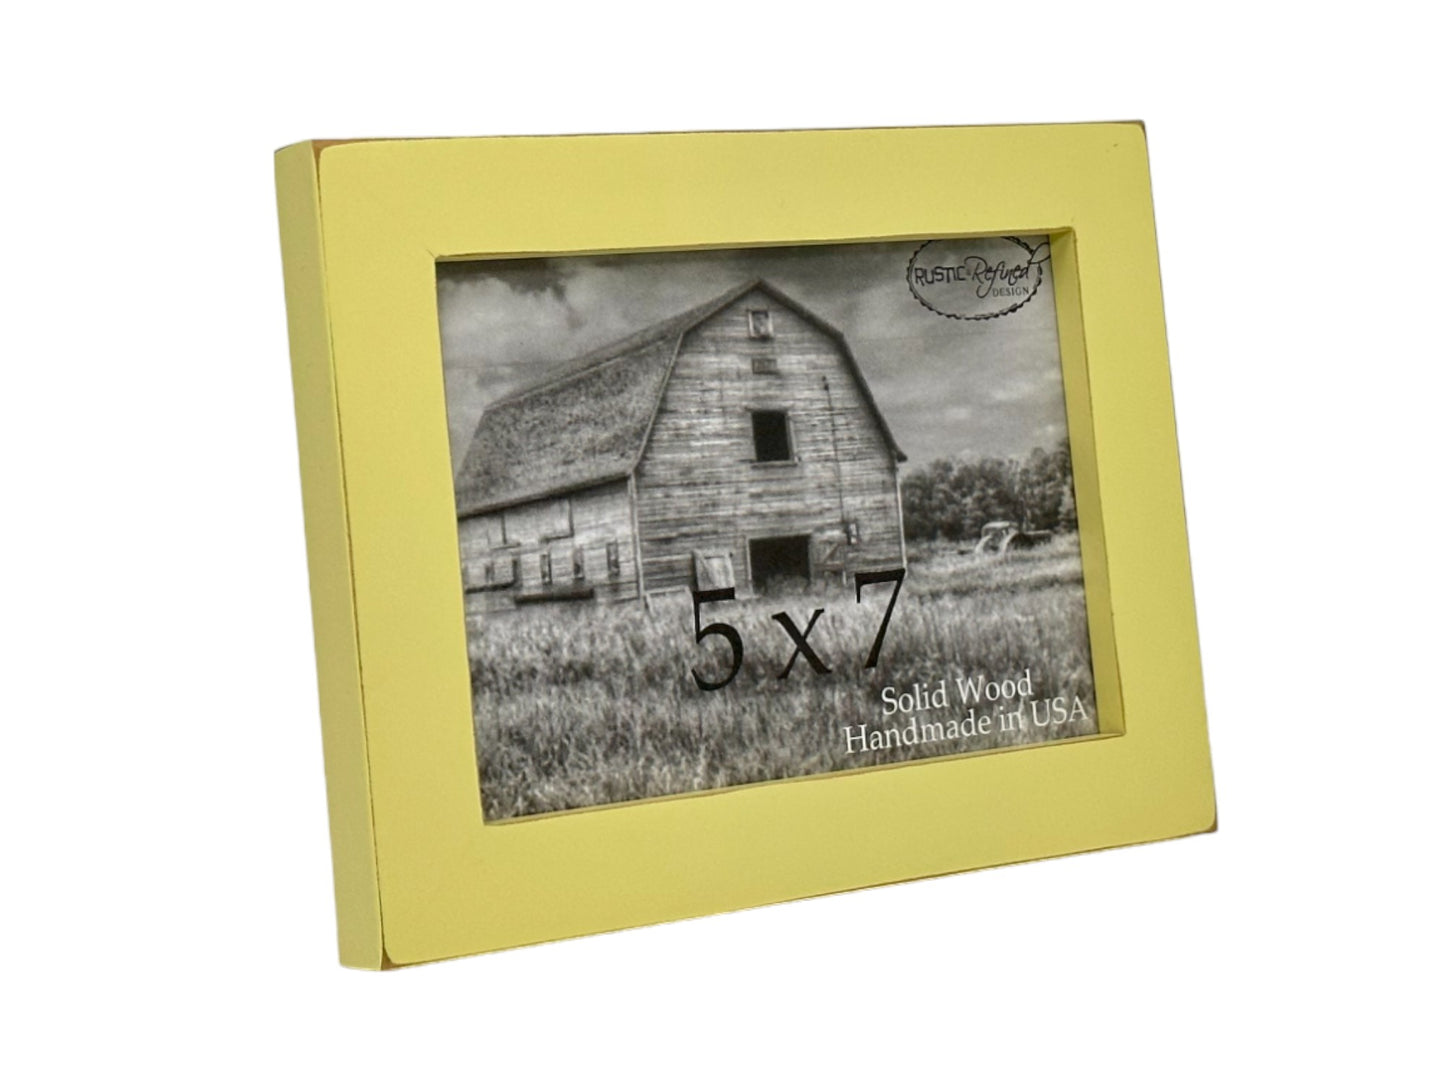 5x7 Rustic Gallery Collection - Picture Frames